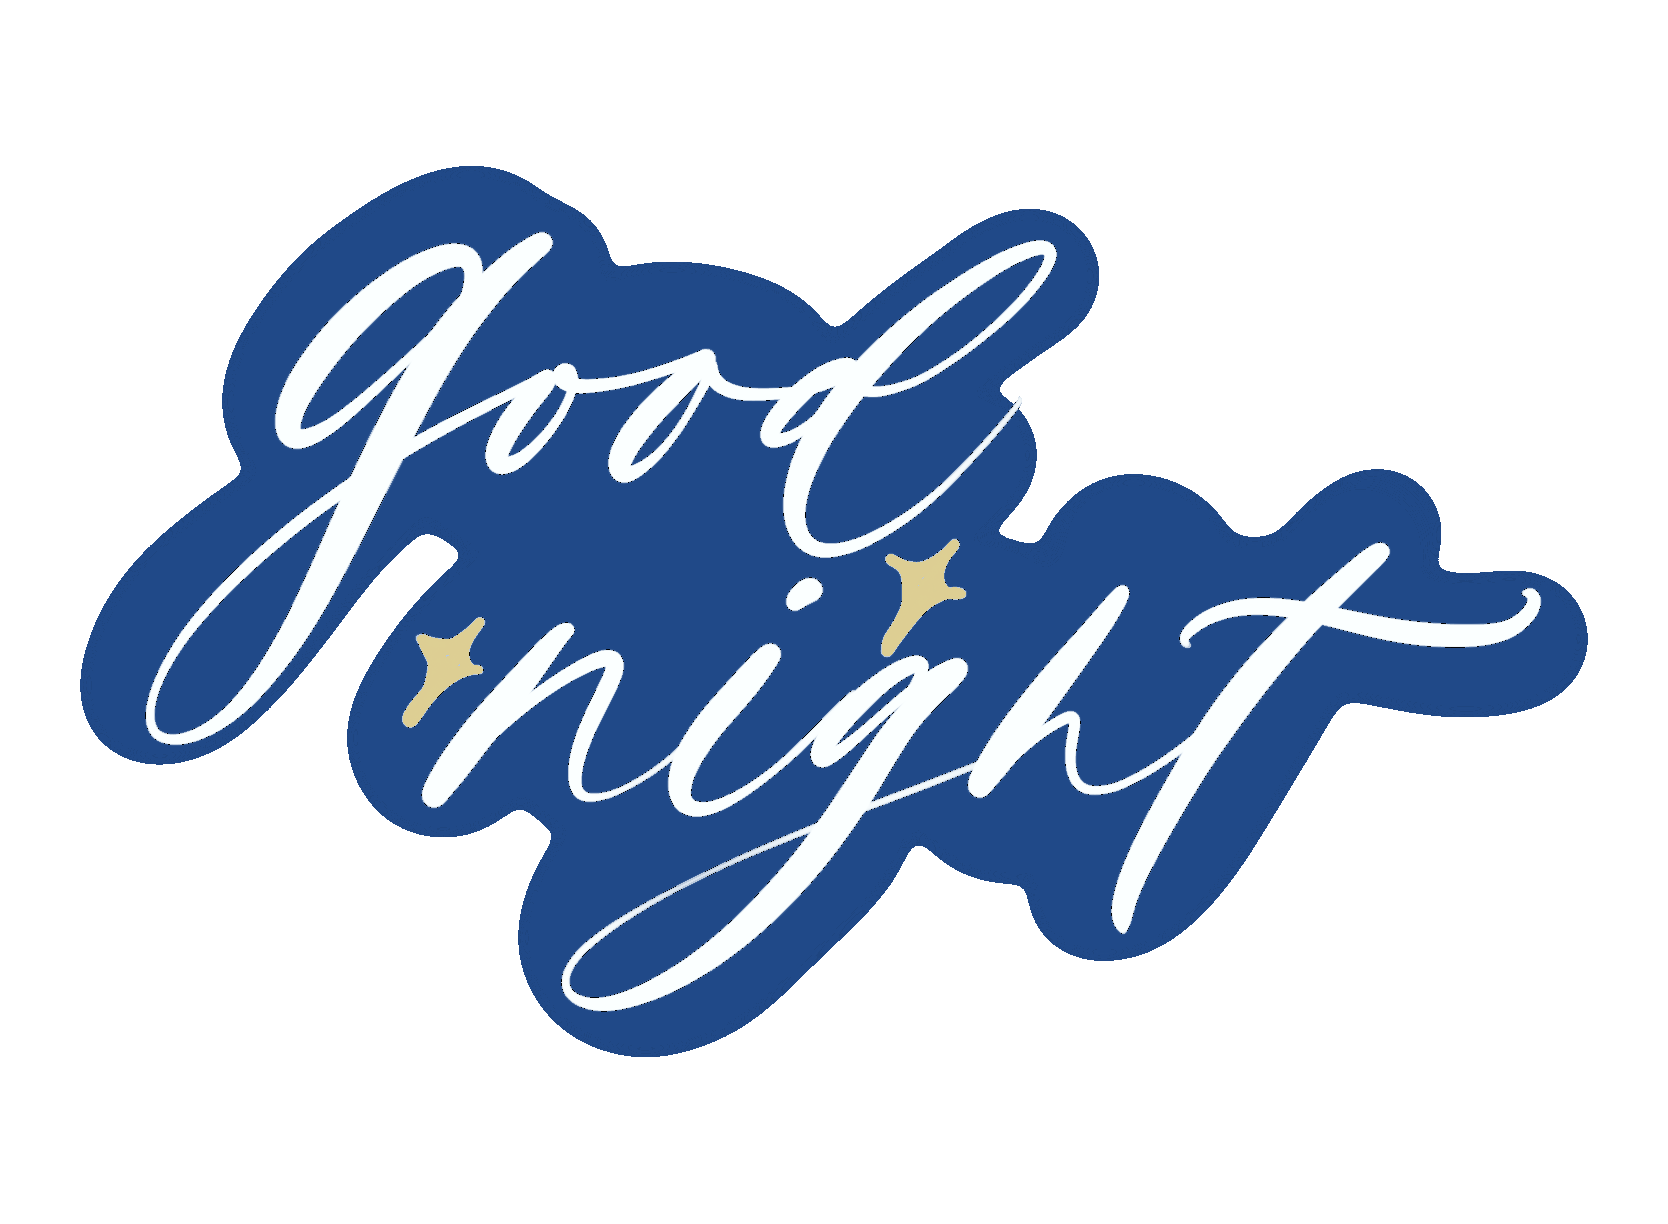 Tired Good Night Sticker by Crafted By Day for iOS & Android GIPHY